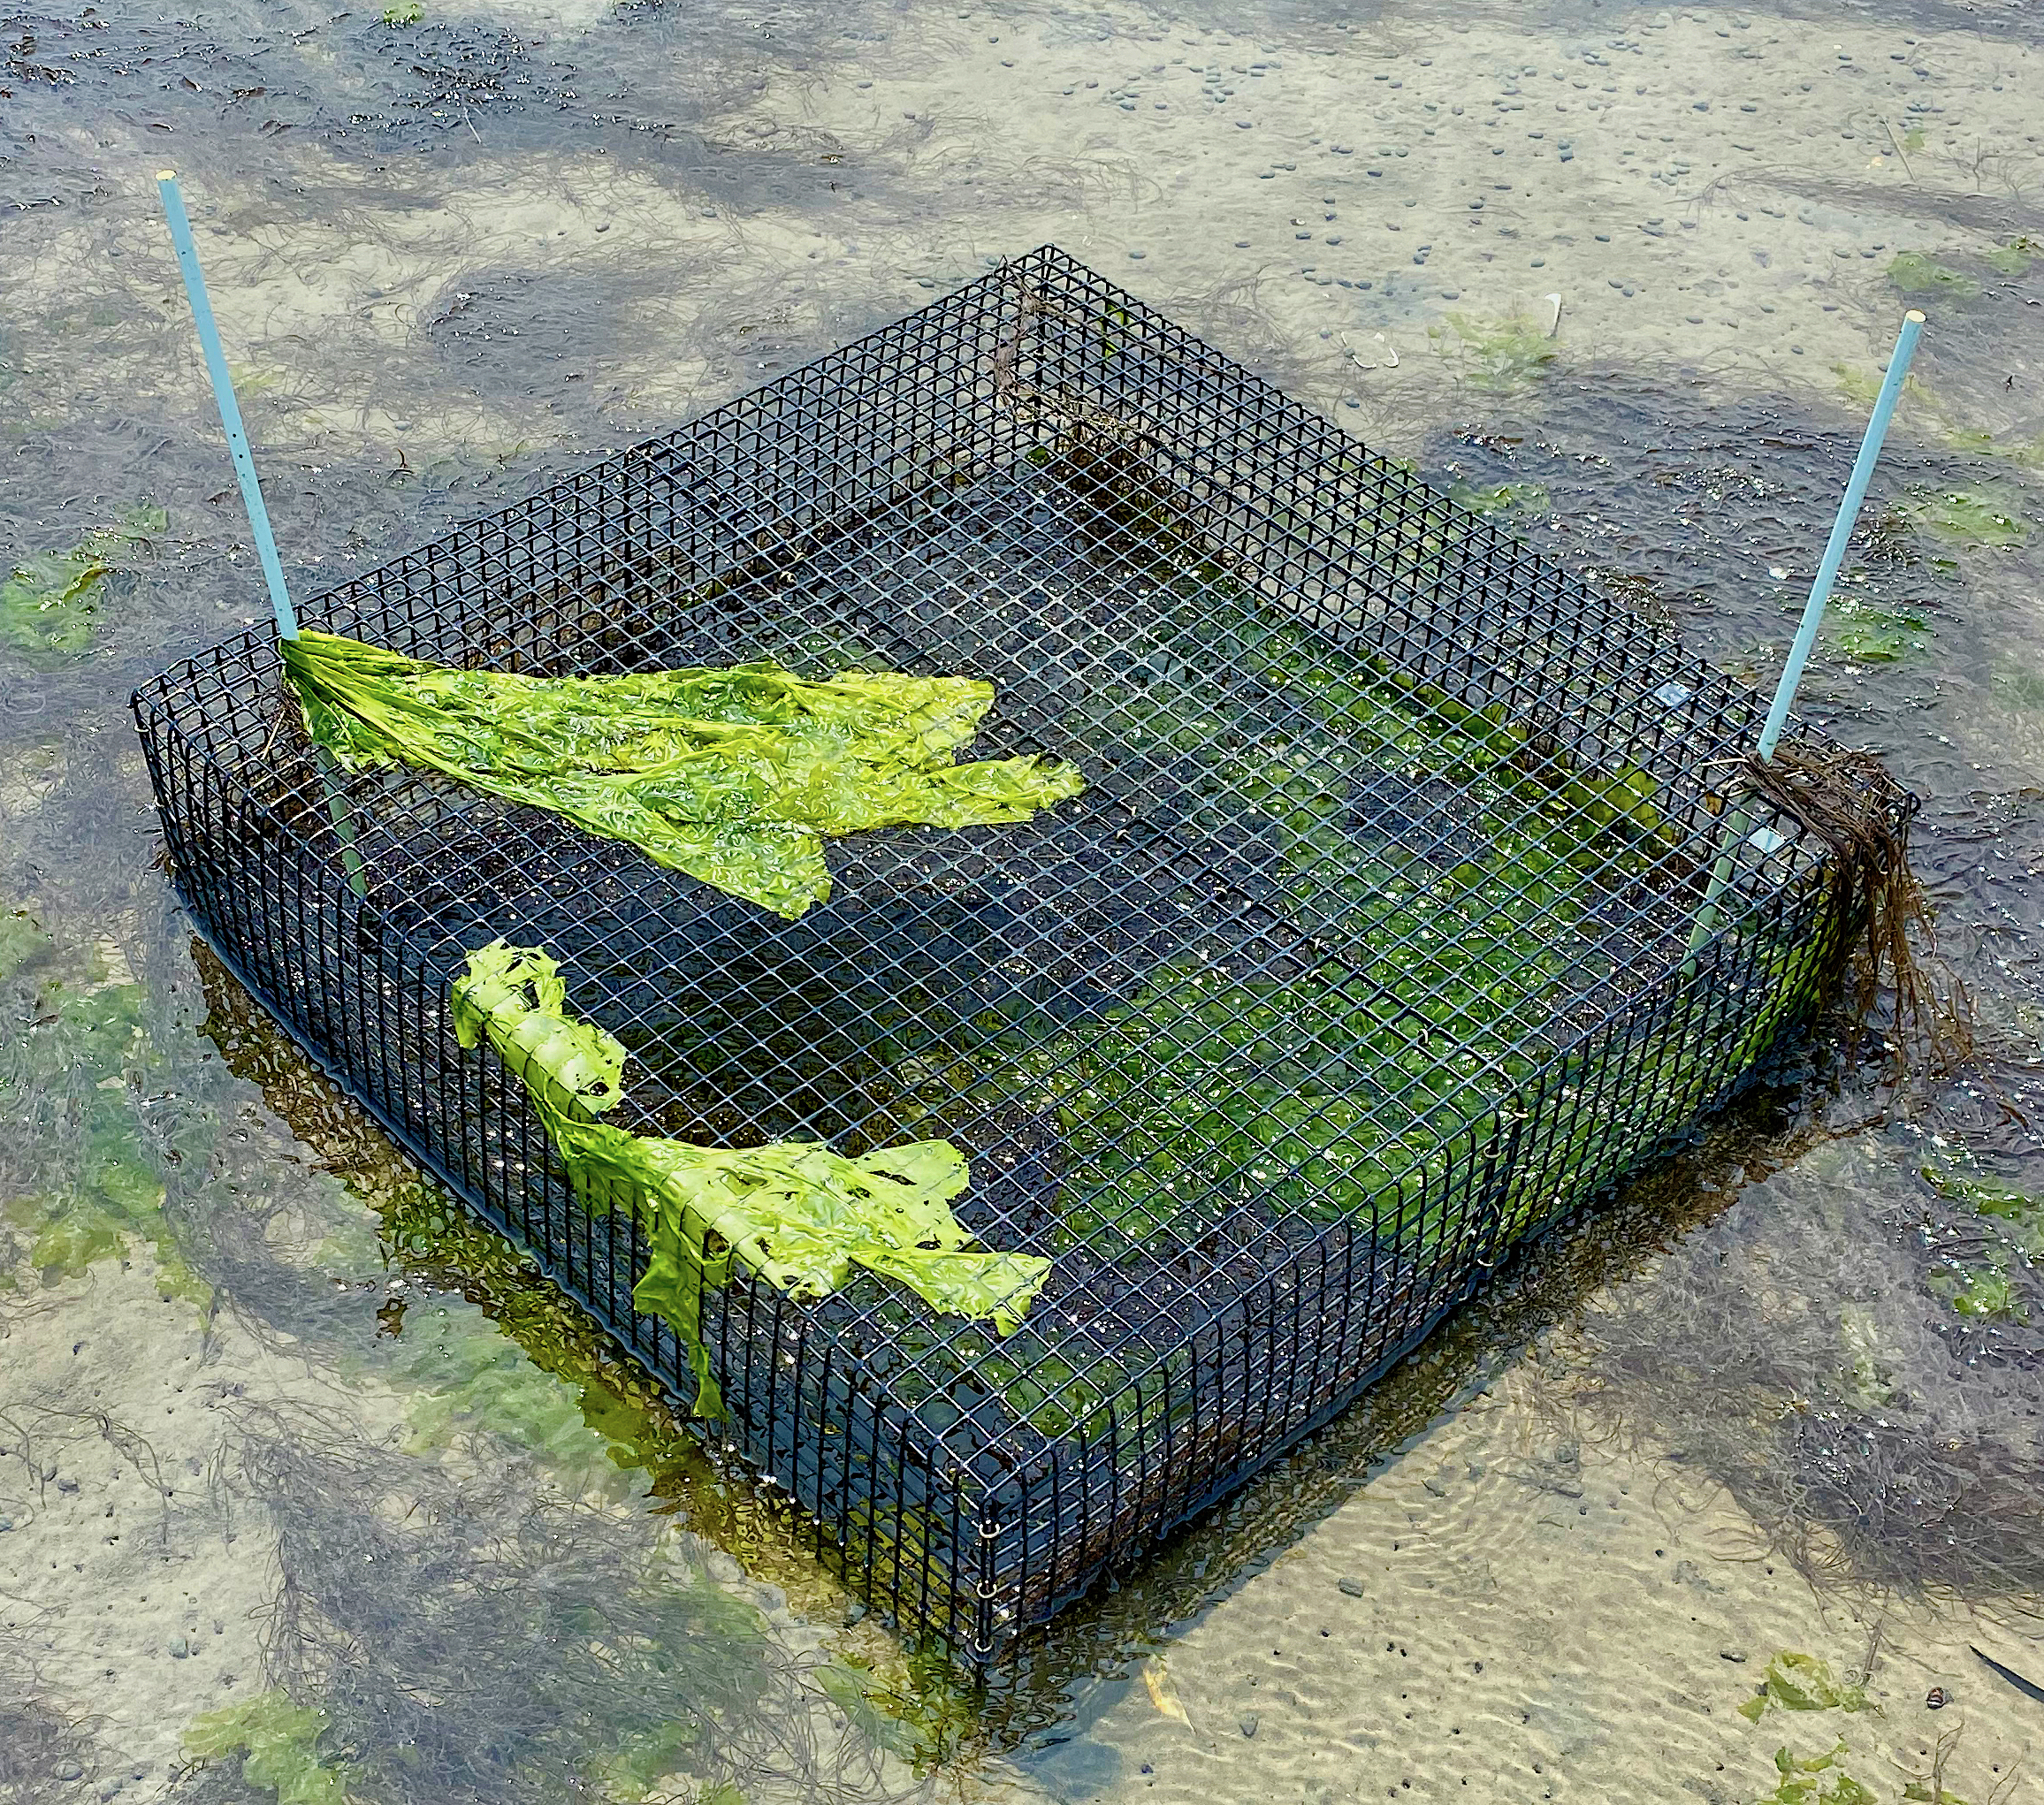 Ramus manipulated the presence of Gracilaria and predators simultaneously in experimental plots by either manually removing Gracilaria or using cages like this one to exclude predators. Credit: Aaron Ramus.